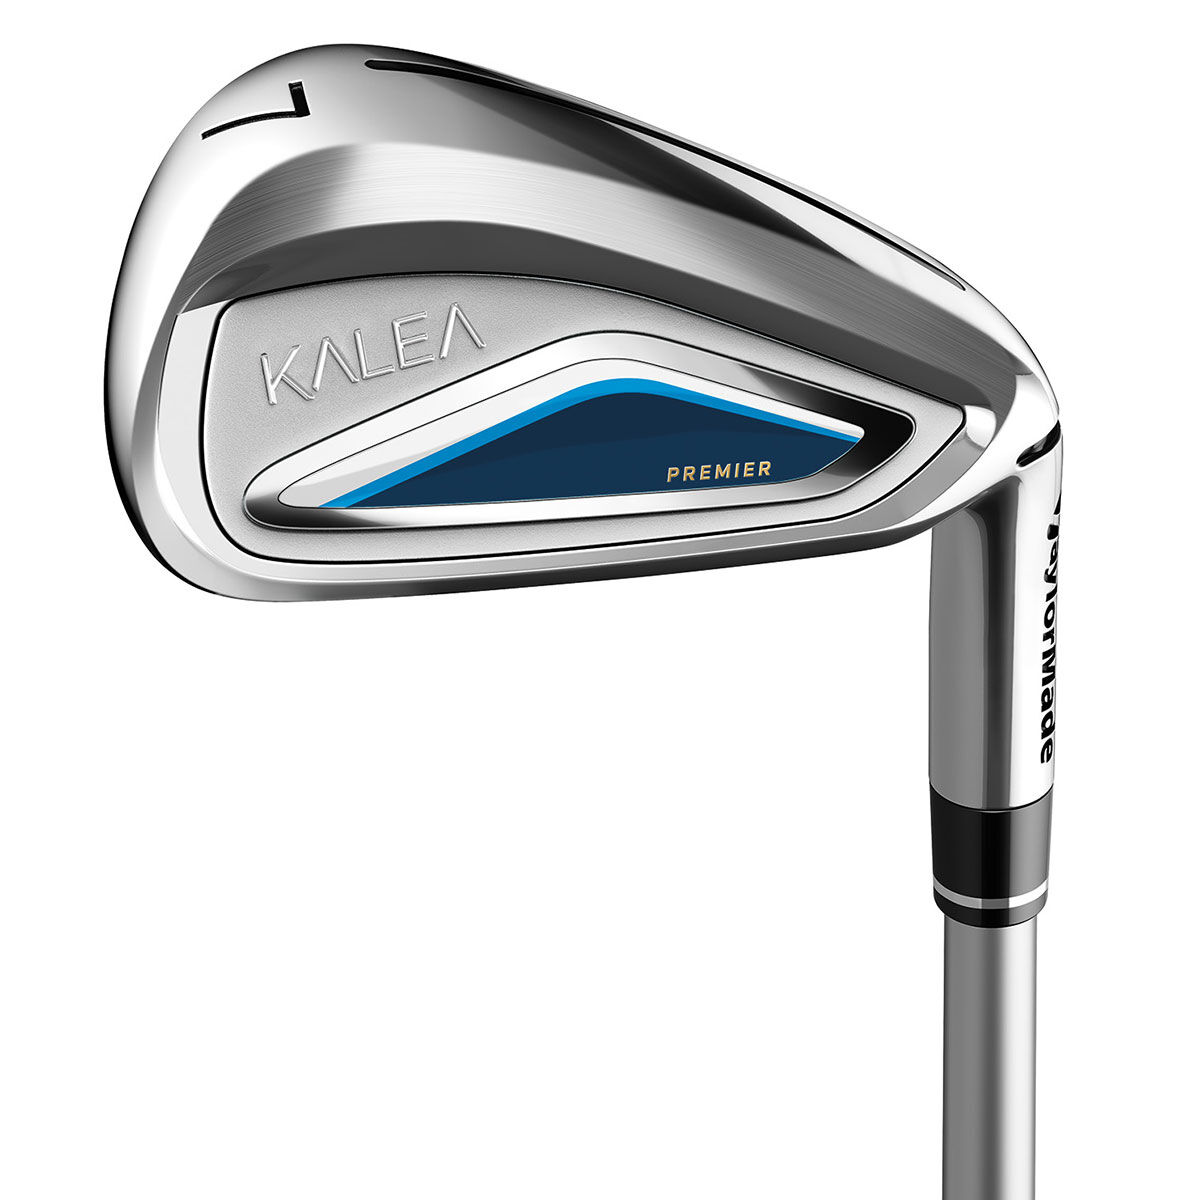 TaylorMade Silver and Blue Lightweight Women's Kalea Premier Custom Fit Golf Irons | American Golf, One Size von TaylorMade